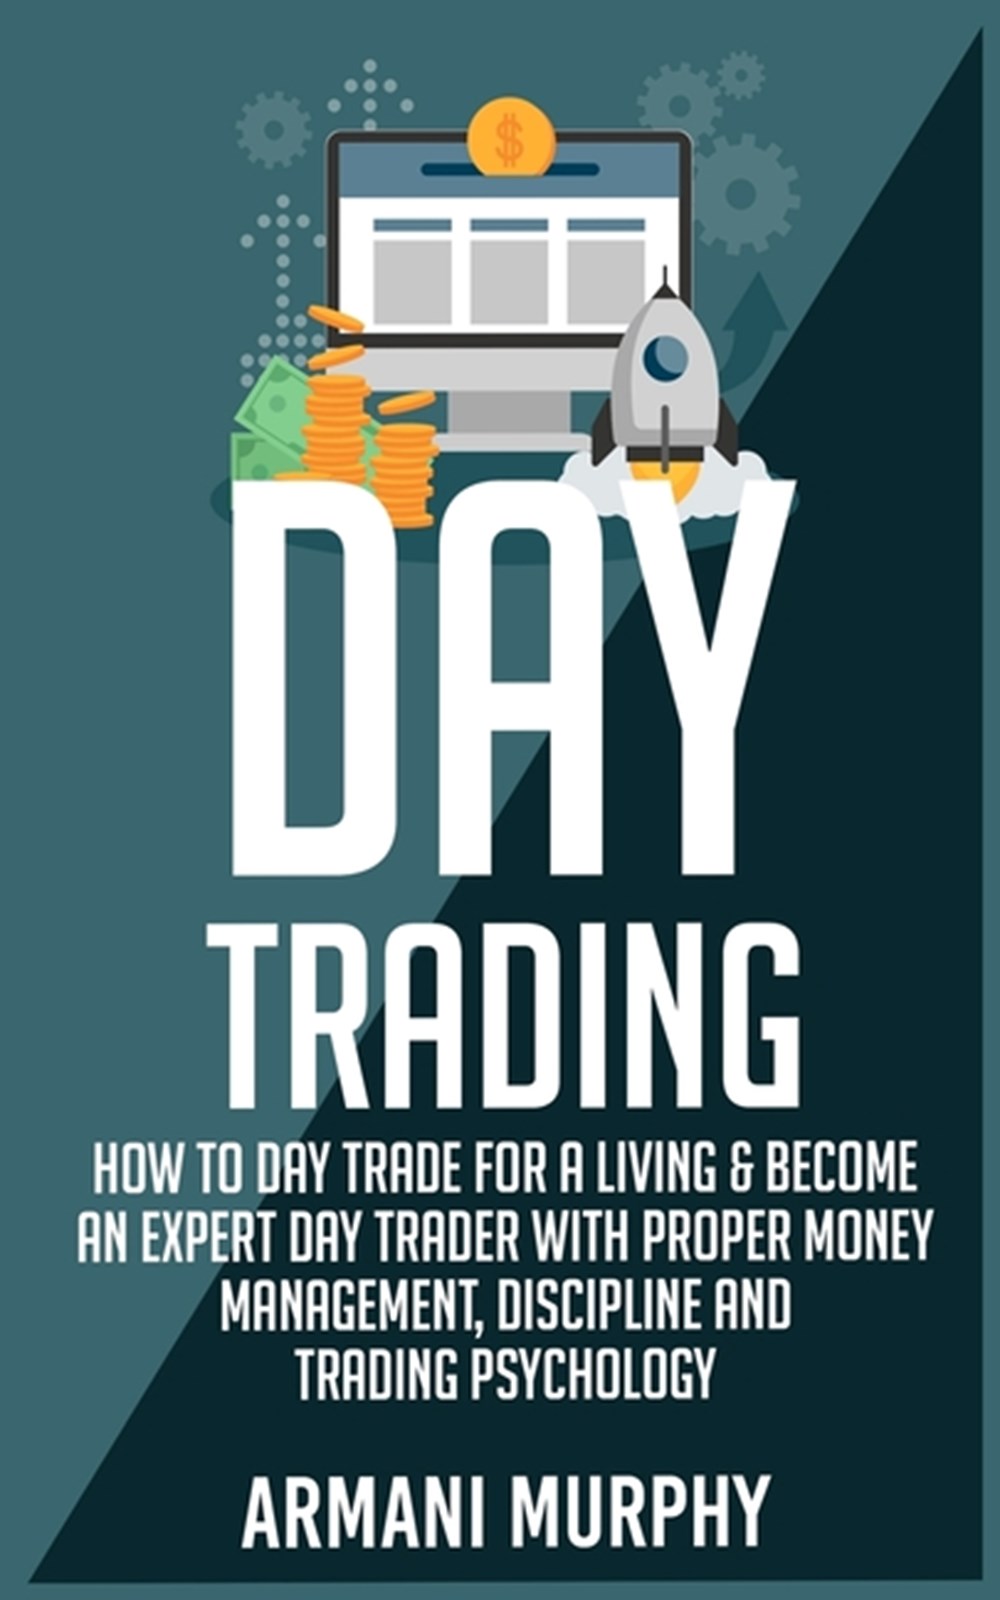 Day Trading in Paperback by Armani Murphy